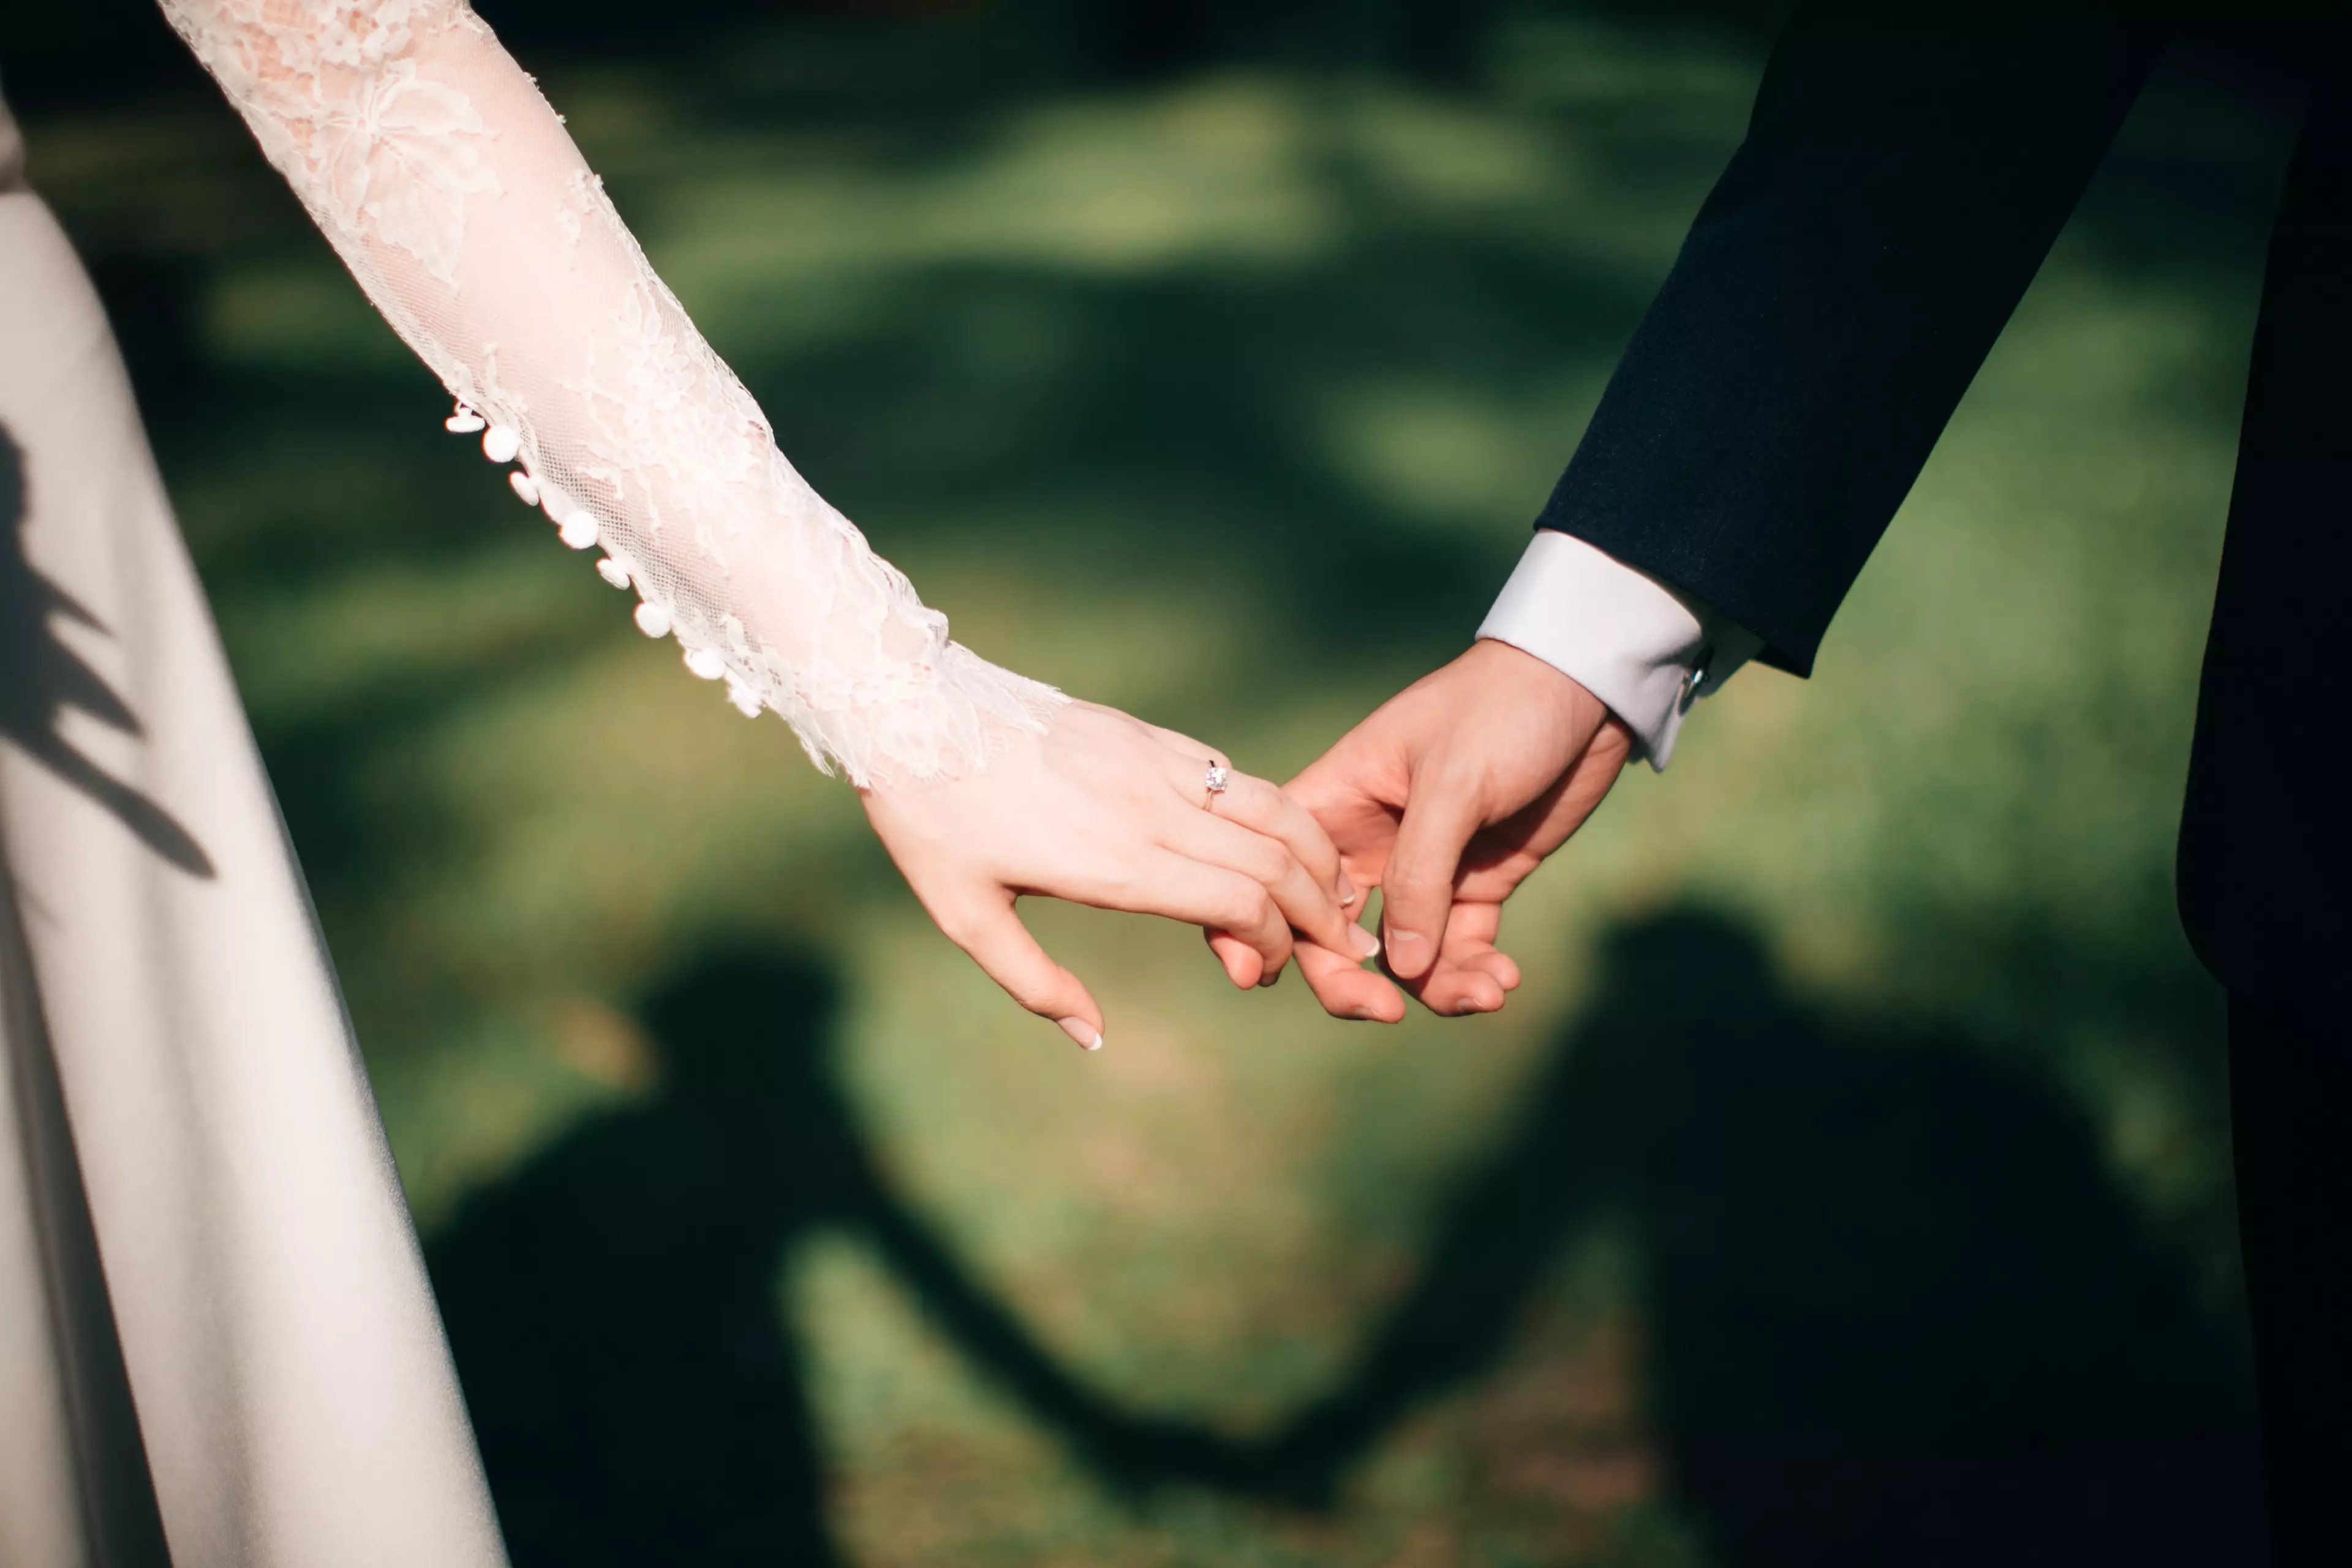 The Law Commission has suggested couples should be allowed to have greater choice over where they get married (